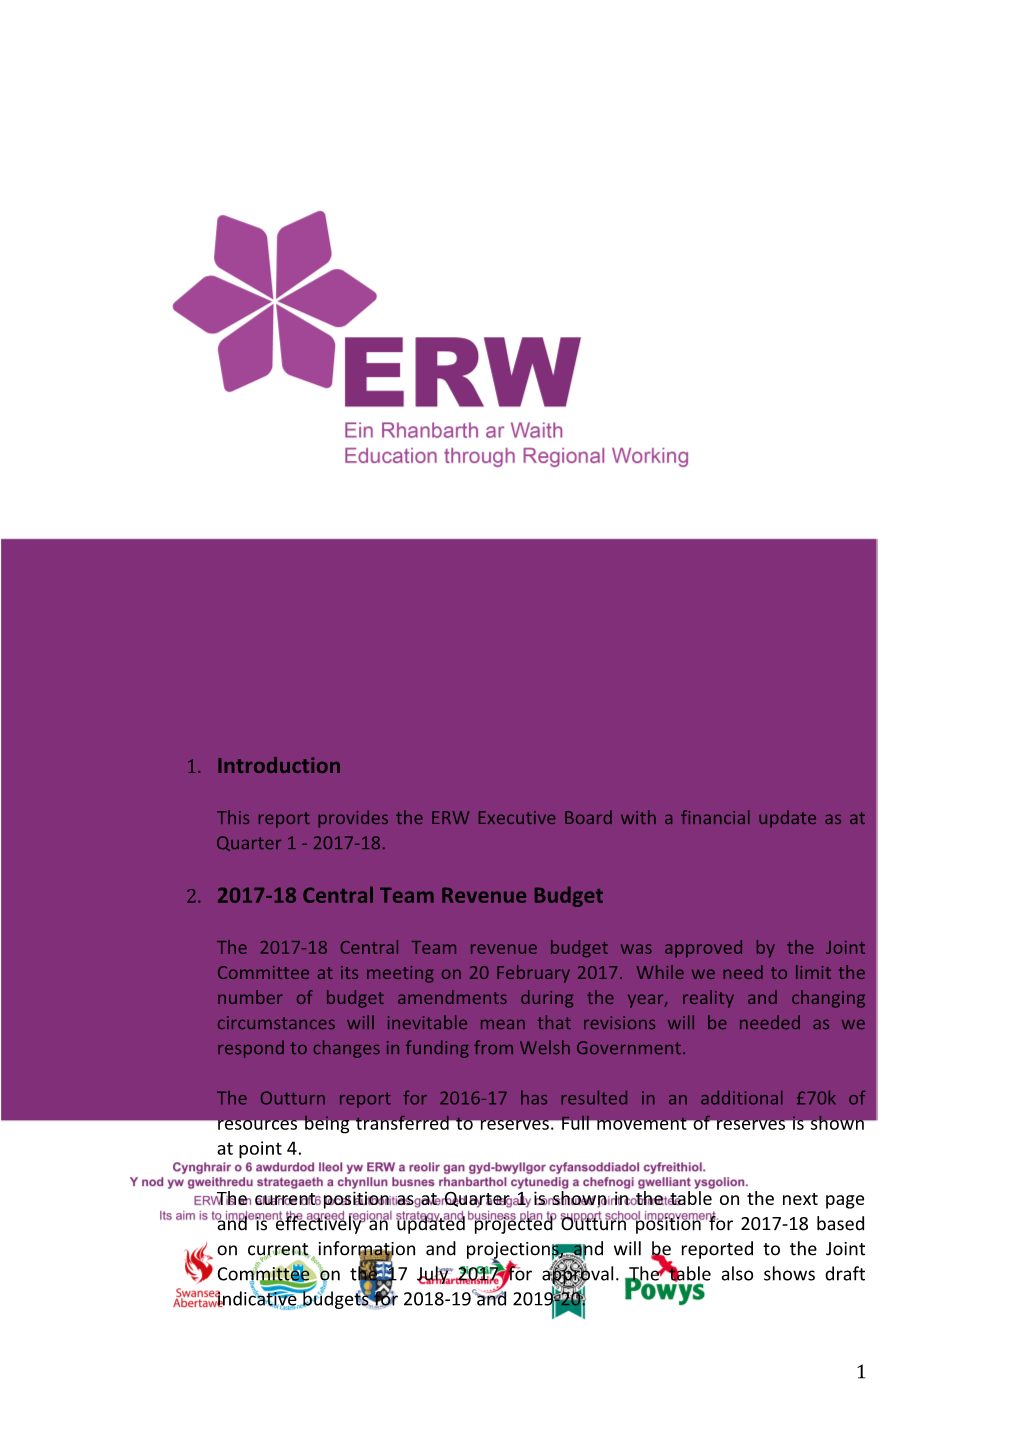 This Report Provides the ERW Executive Board with a Financial Update As at Quarter 1 - 2017-18